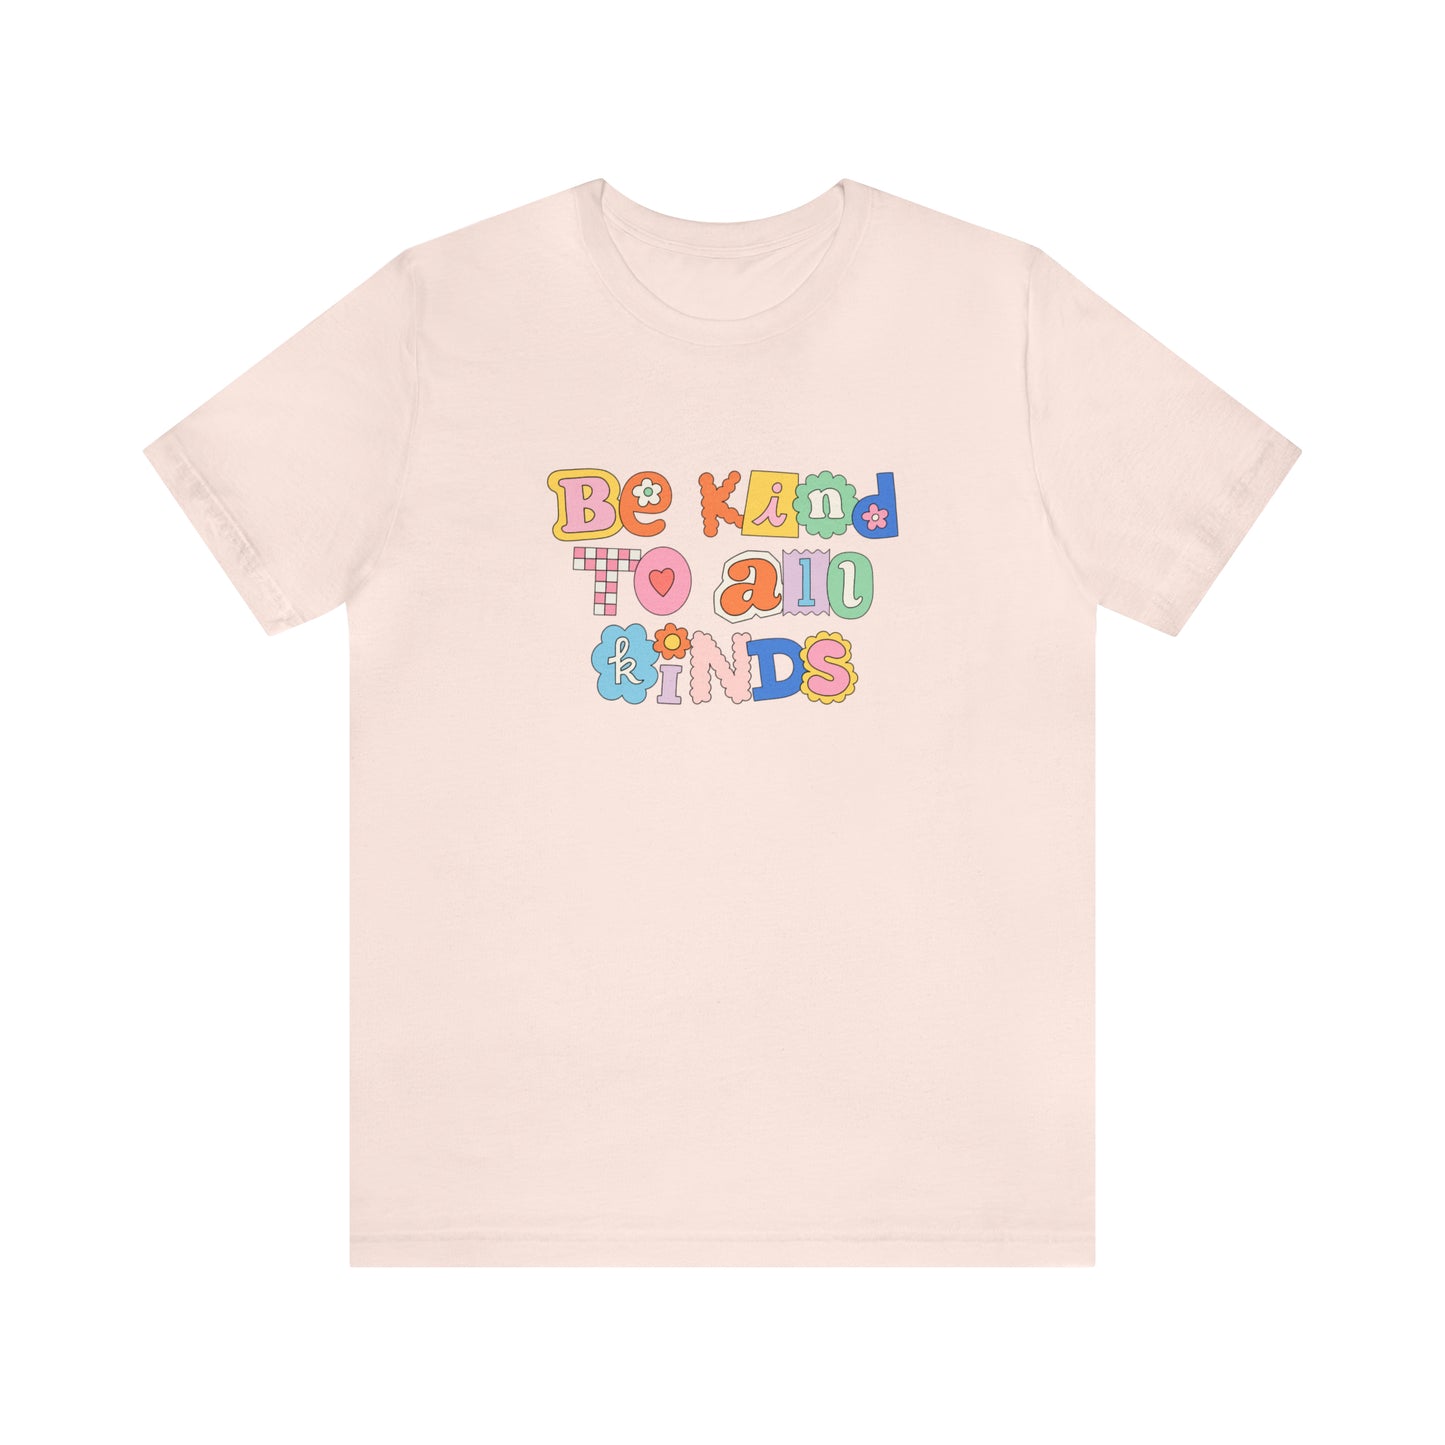 Be Kind to All Kinds Jersey T-Shirt